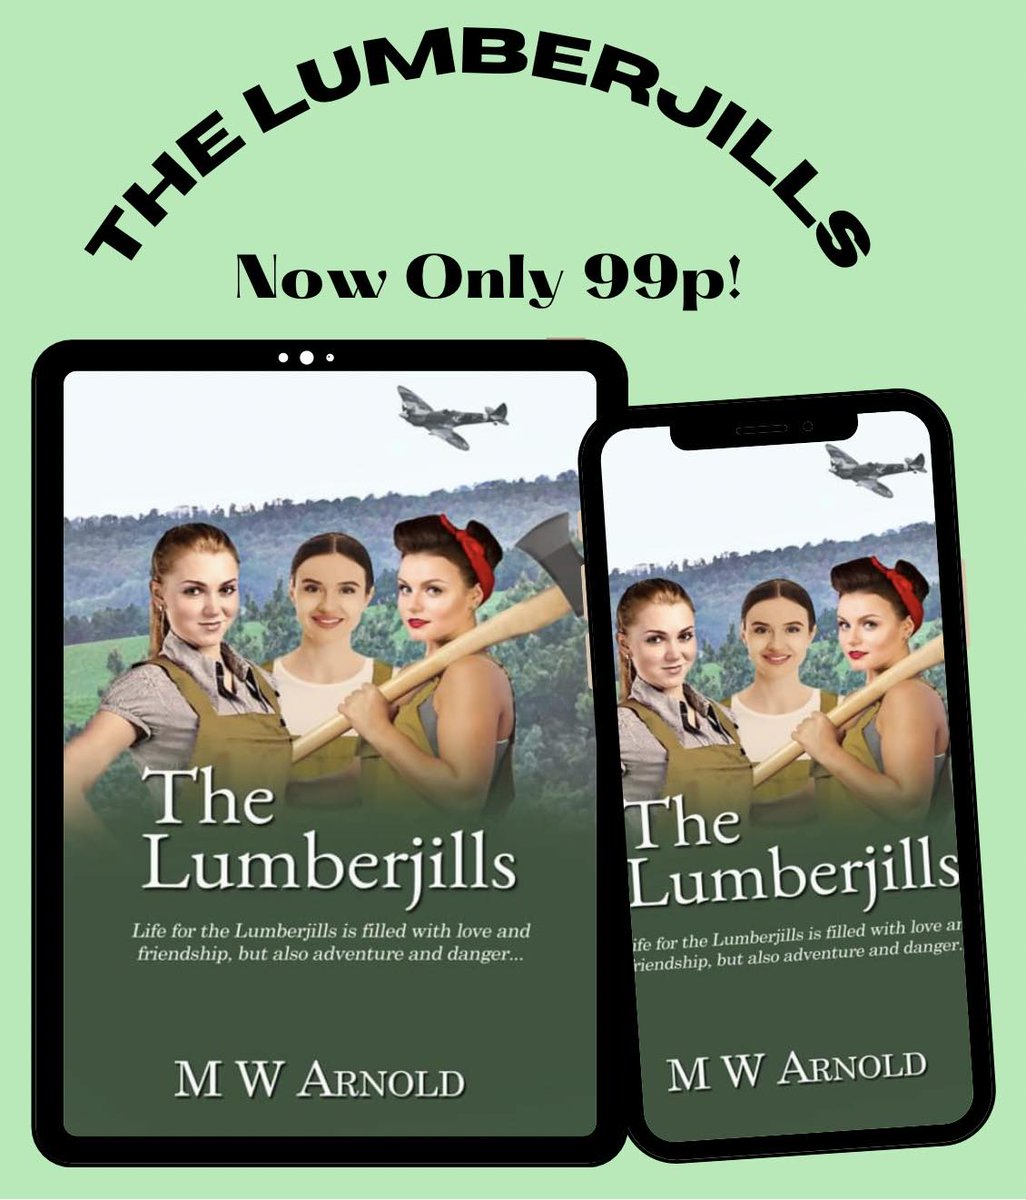 “A 99p Kindle Deal - Last Day Brilliantly written, highly entertaining informative read that I thoroughly enjoyed.” Review of ‘The Lumberjills’ by Nicki's Book Blog @nickisbookblog mybook.to/TLJ1 @WildRosePress #99p #Historical #mystery #Romance #BookTwitter #BookBoost